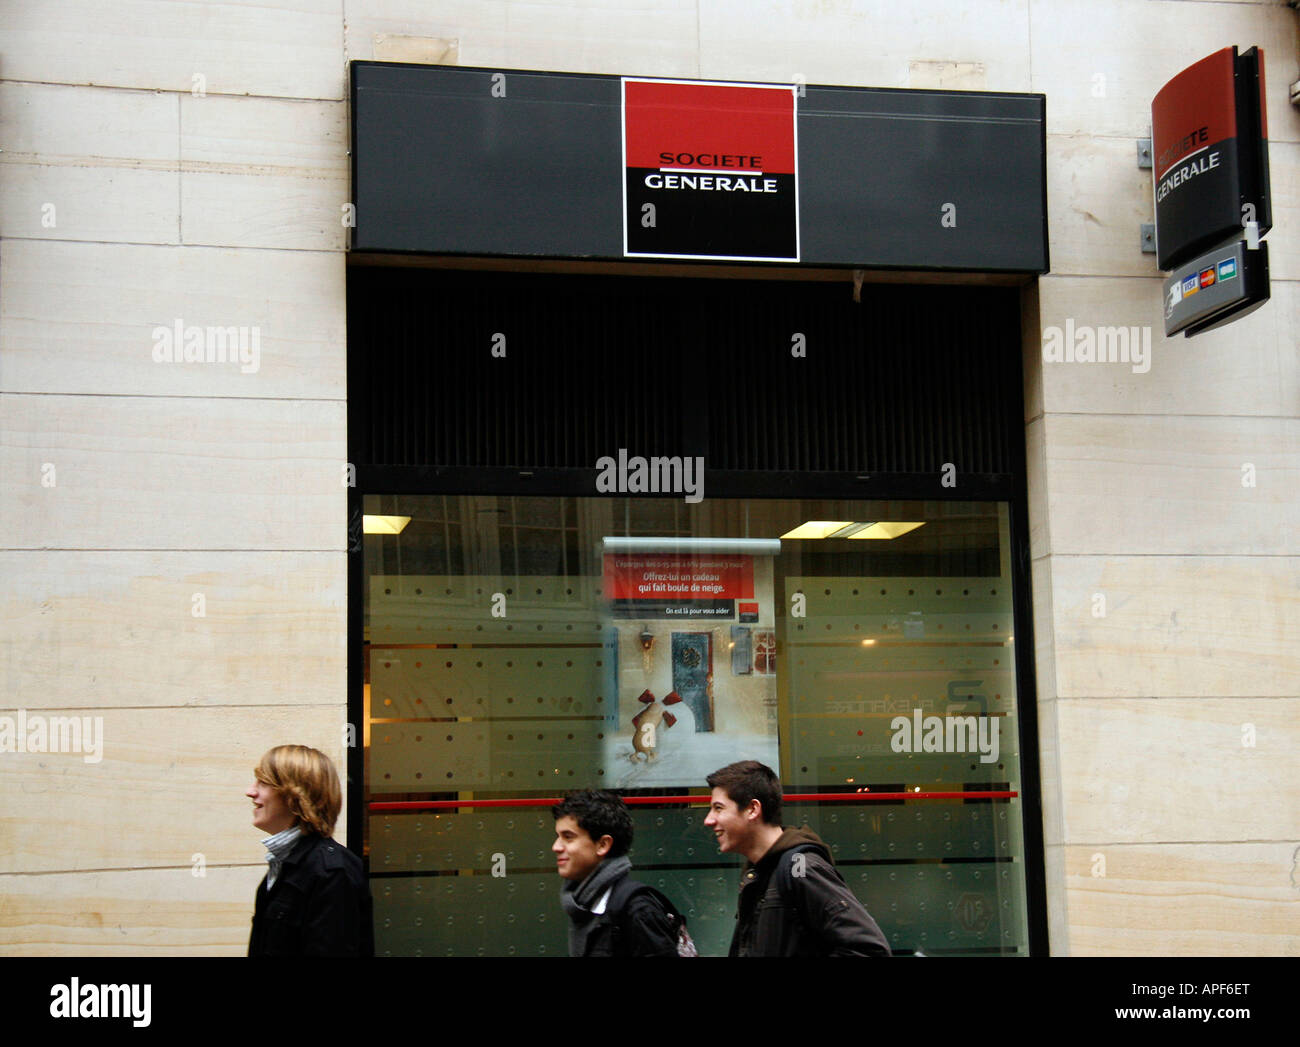 Youths walk past a Societe Generale bank in Rouen Seine Maritime France Stock Photo